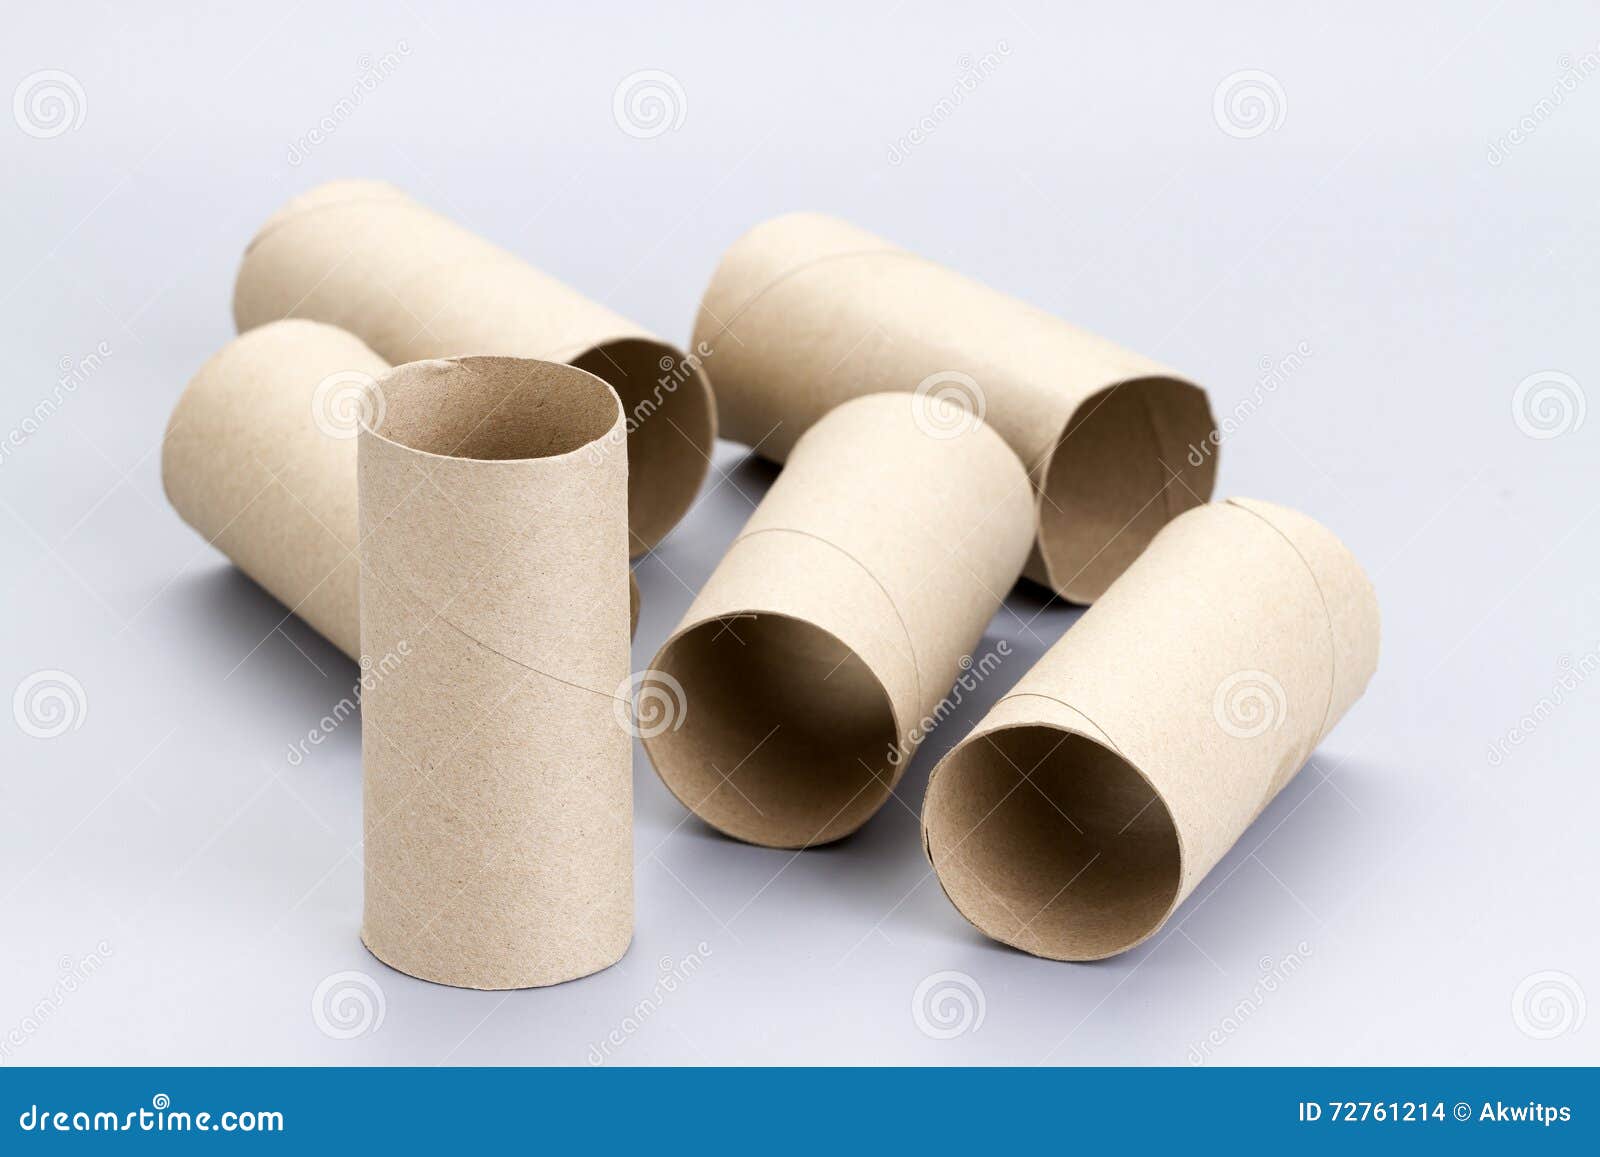 Brown Tissue Paper Roll Core Isolated On White Background Stock Photo,  Picture and Royalty Free Image. Image 75540437.